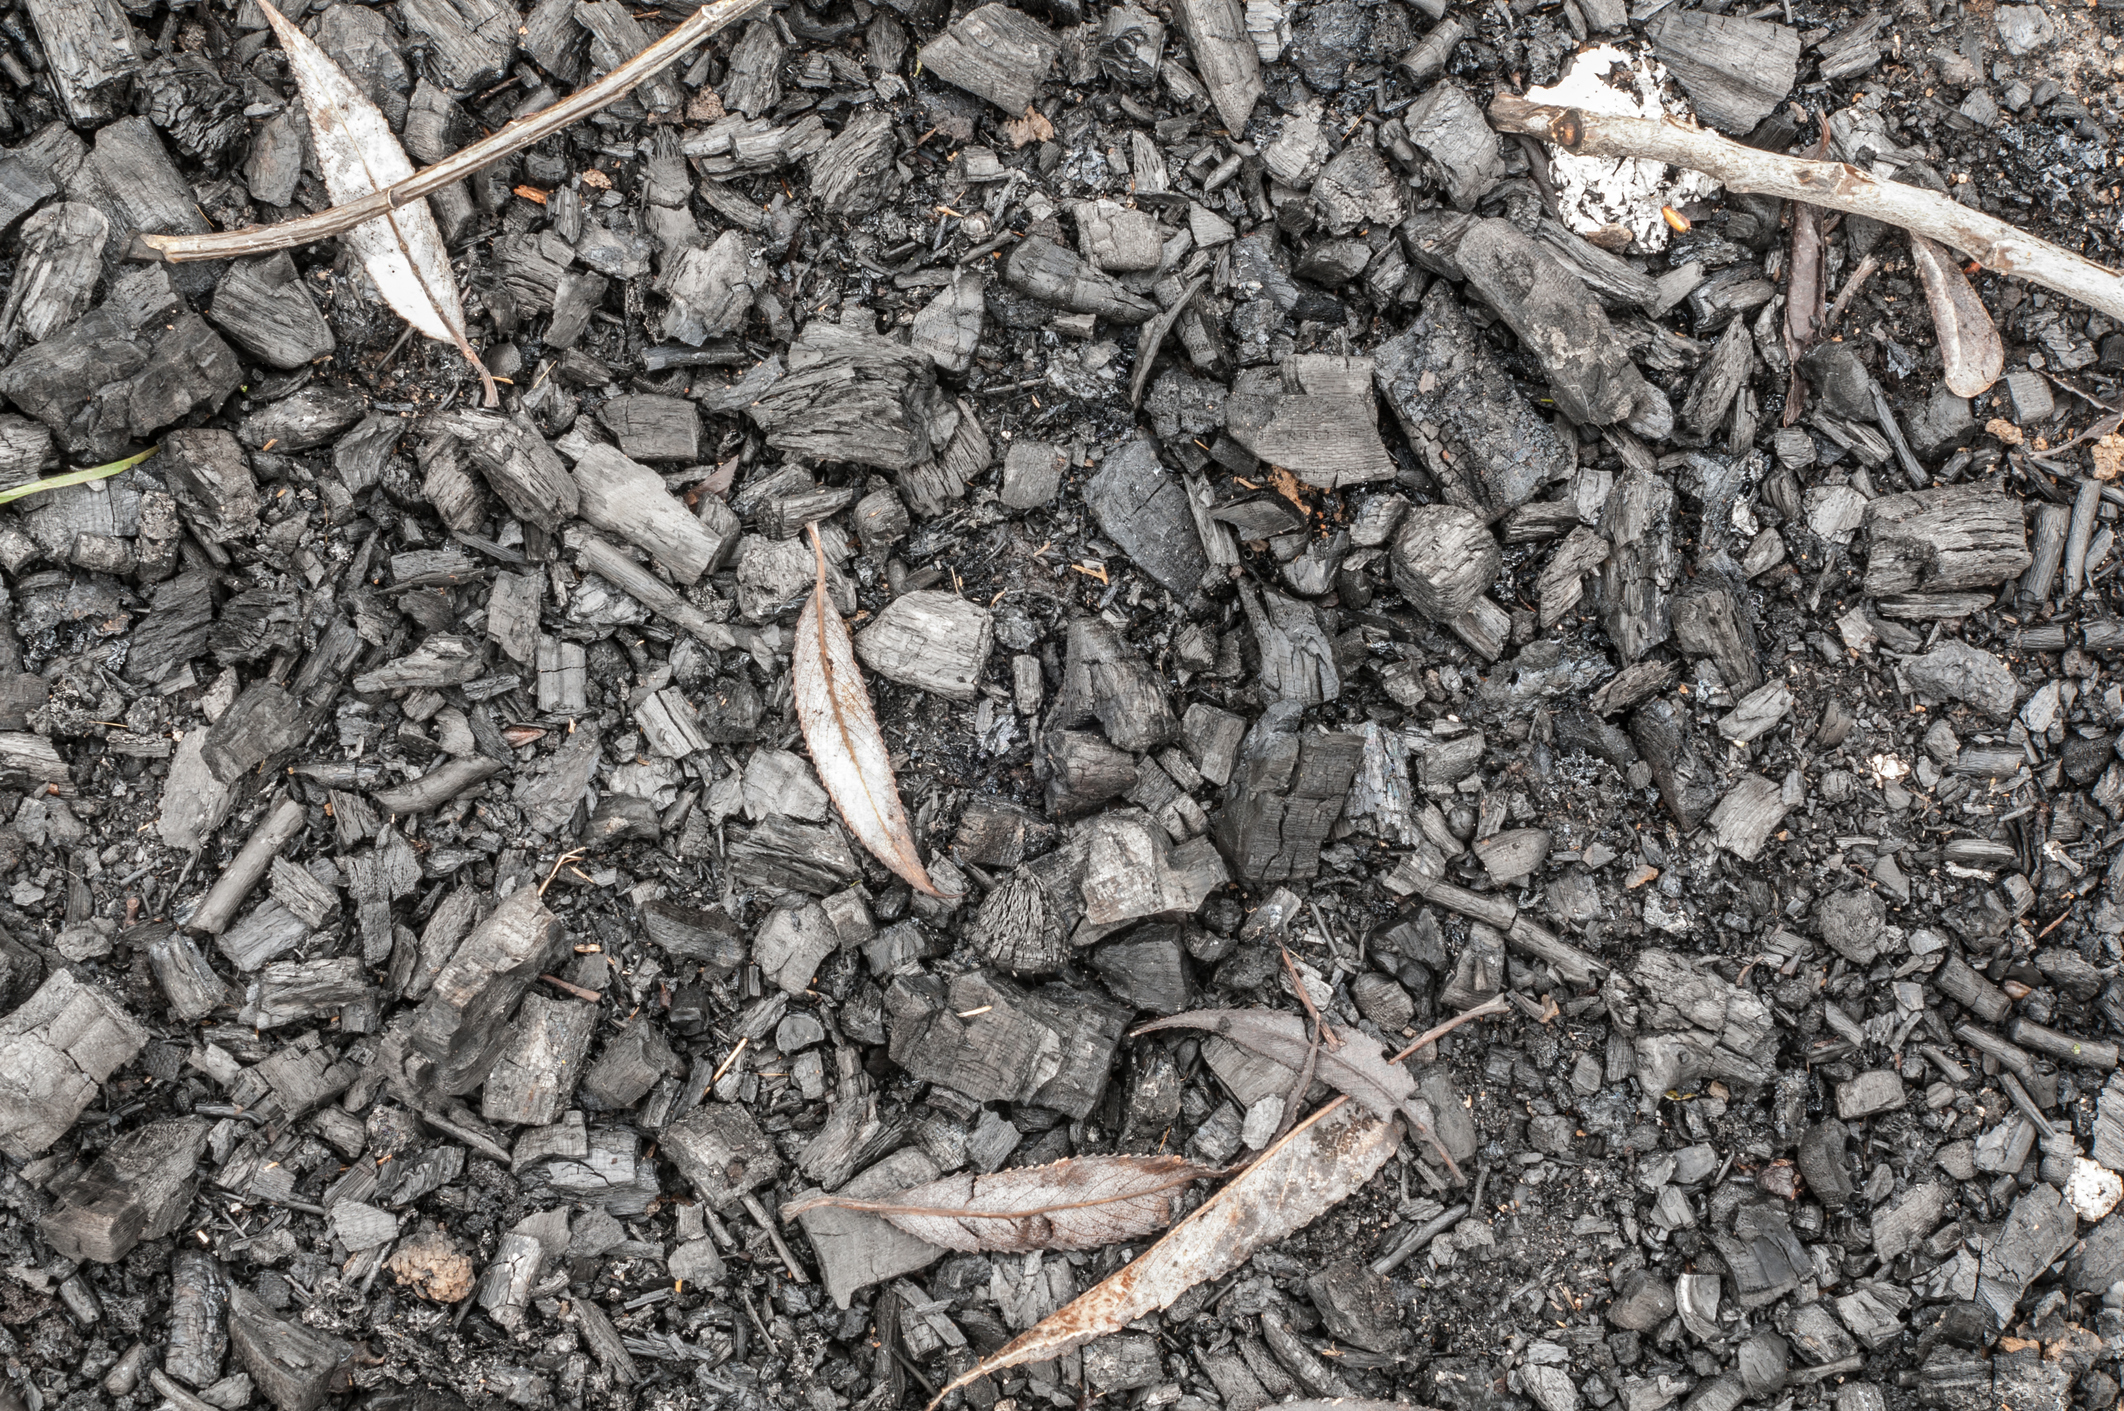 Black ashes or charcoal texture, background. (Photo: iStock - Okrip)